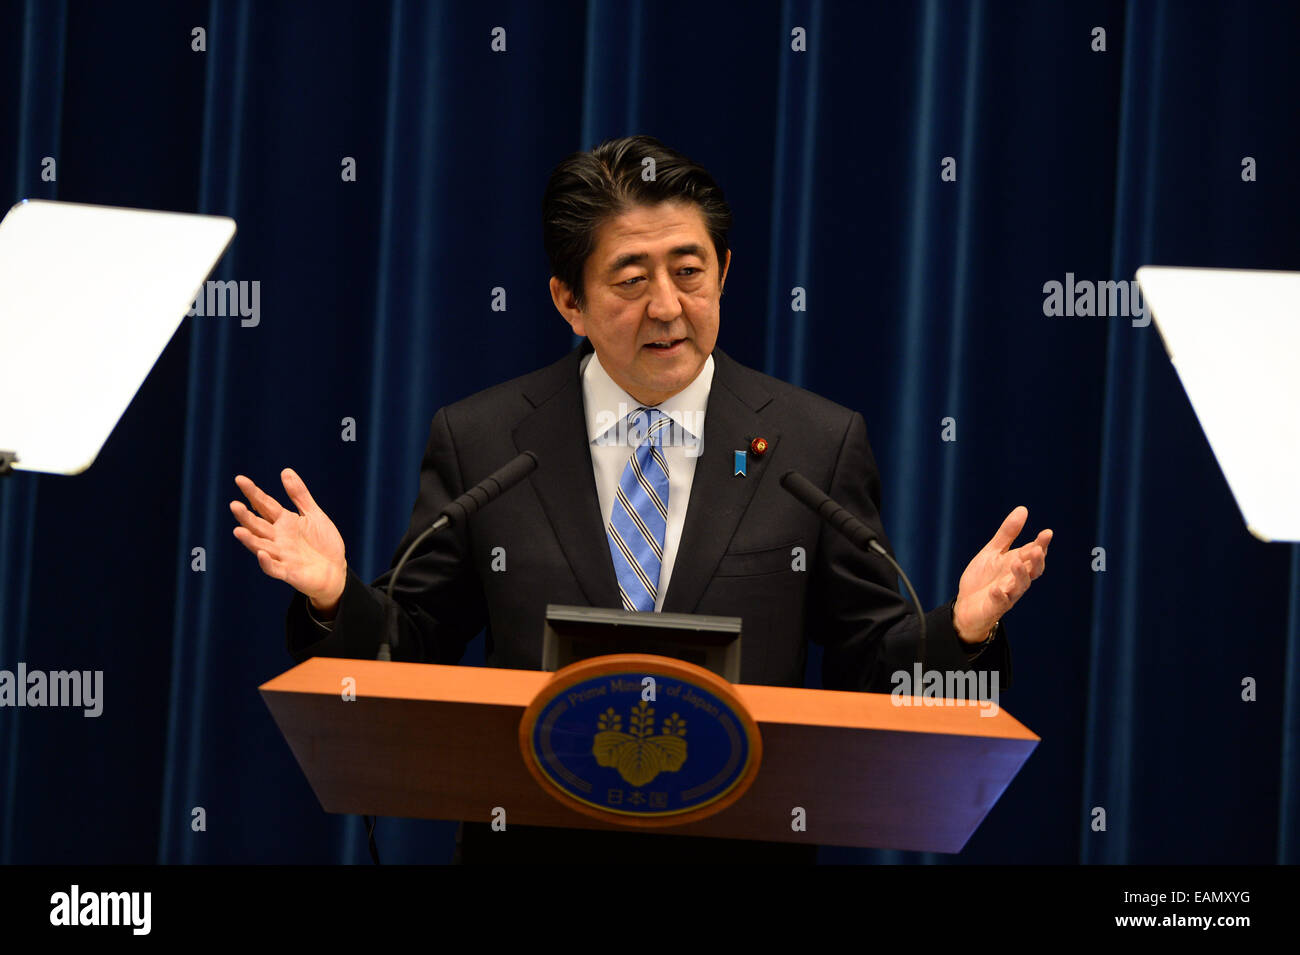 Tokyo, Japan. 18th Nov, 2014. Japanese Prime Minister Shinzo Abe addresses a press conference in Tokyo, Japan, Nov. 18, 2014. Japanese Prime Minister Shinzo Abe on Tuesday told a press conference that he would dissolve the lower house on Nov. 21 and decided to postpone the second round sales tax hike by 18 months, in the wake of the country's severe economic situation. Credit:  Ma Ping/Xinhua/Alamy Live News Stock Photo